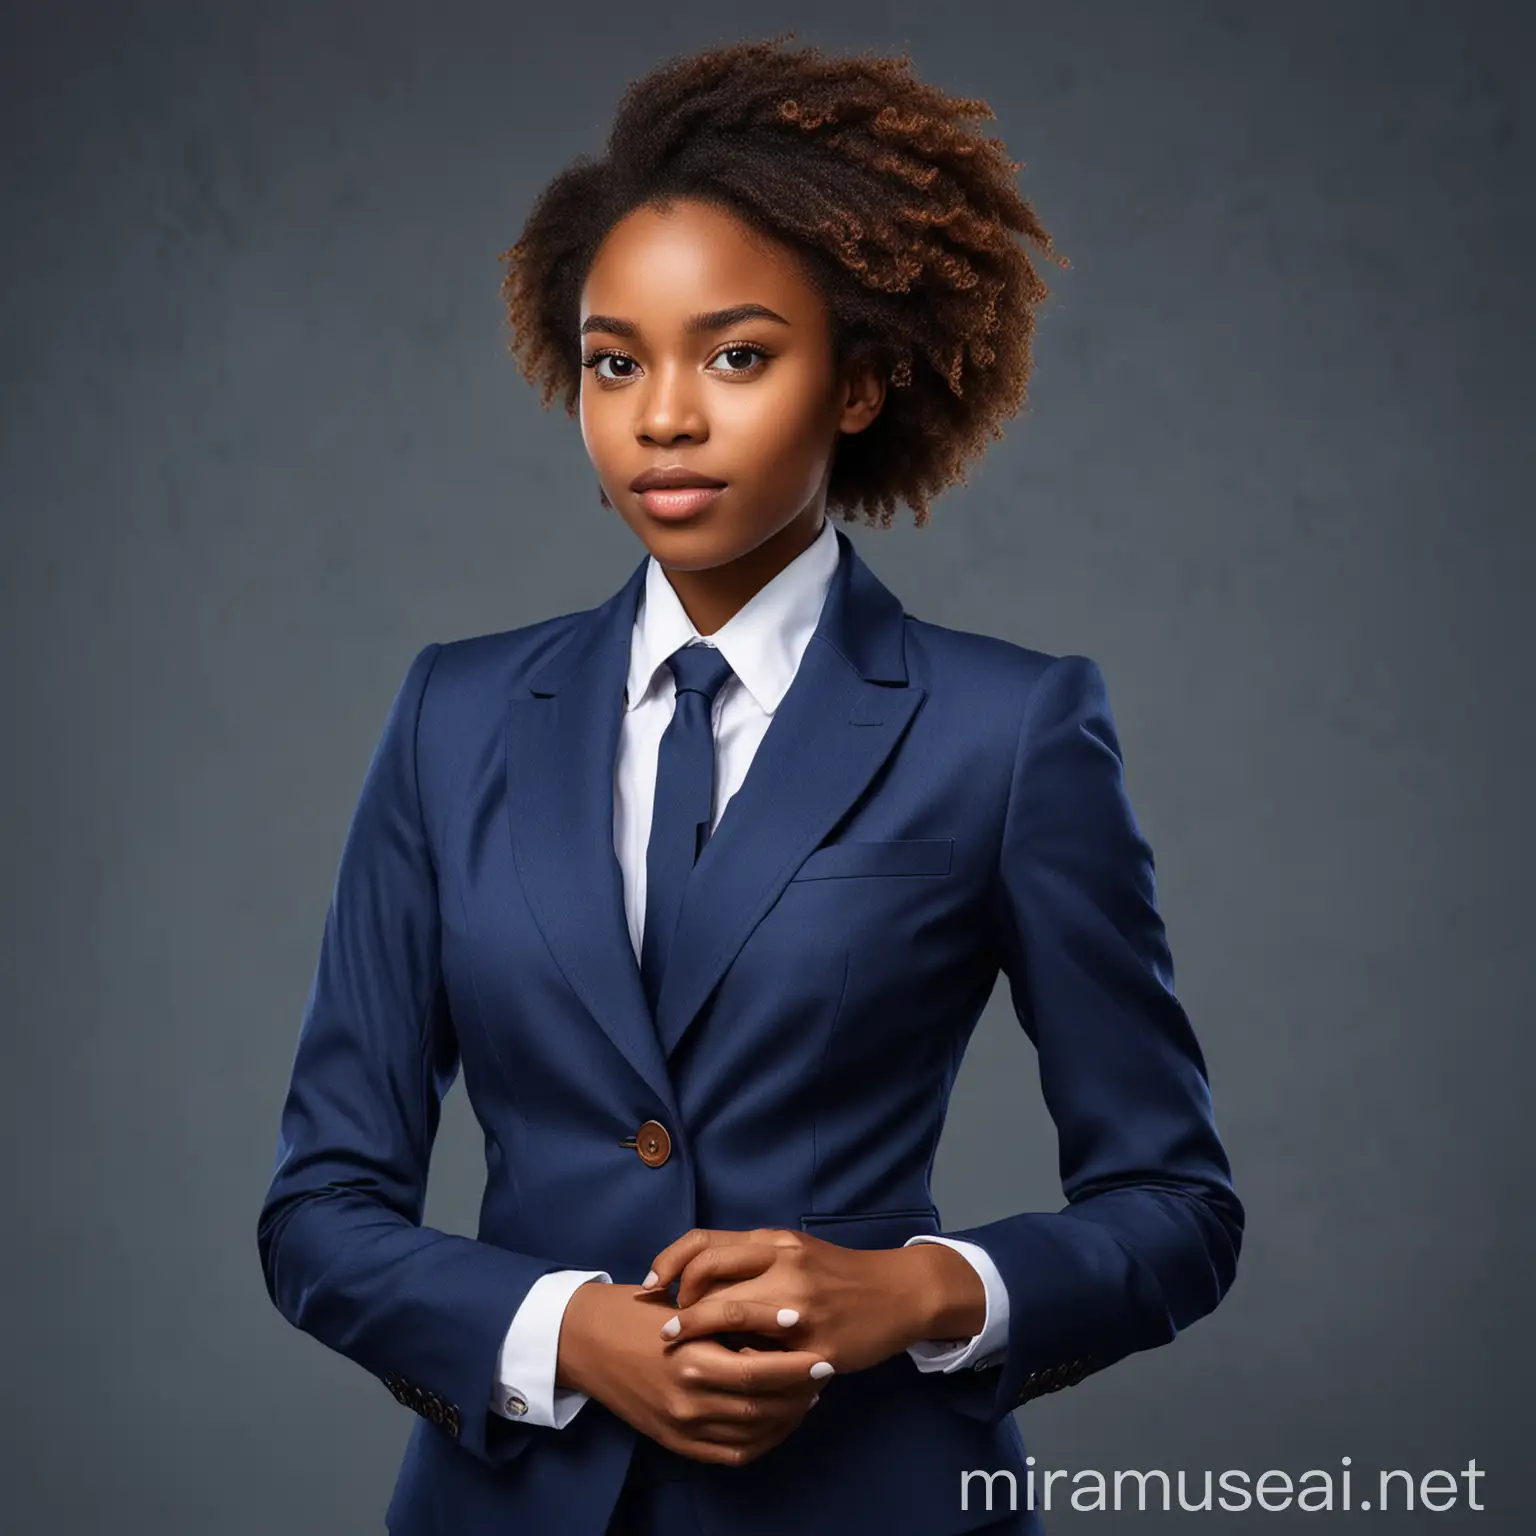 Professional African American Woman in Blue Business Attire